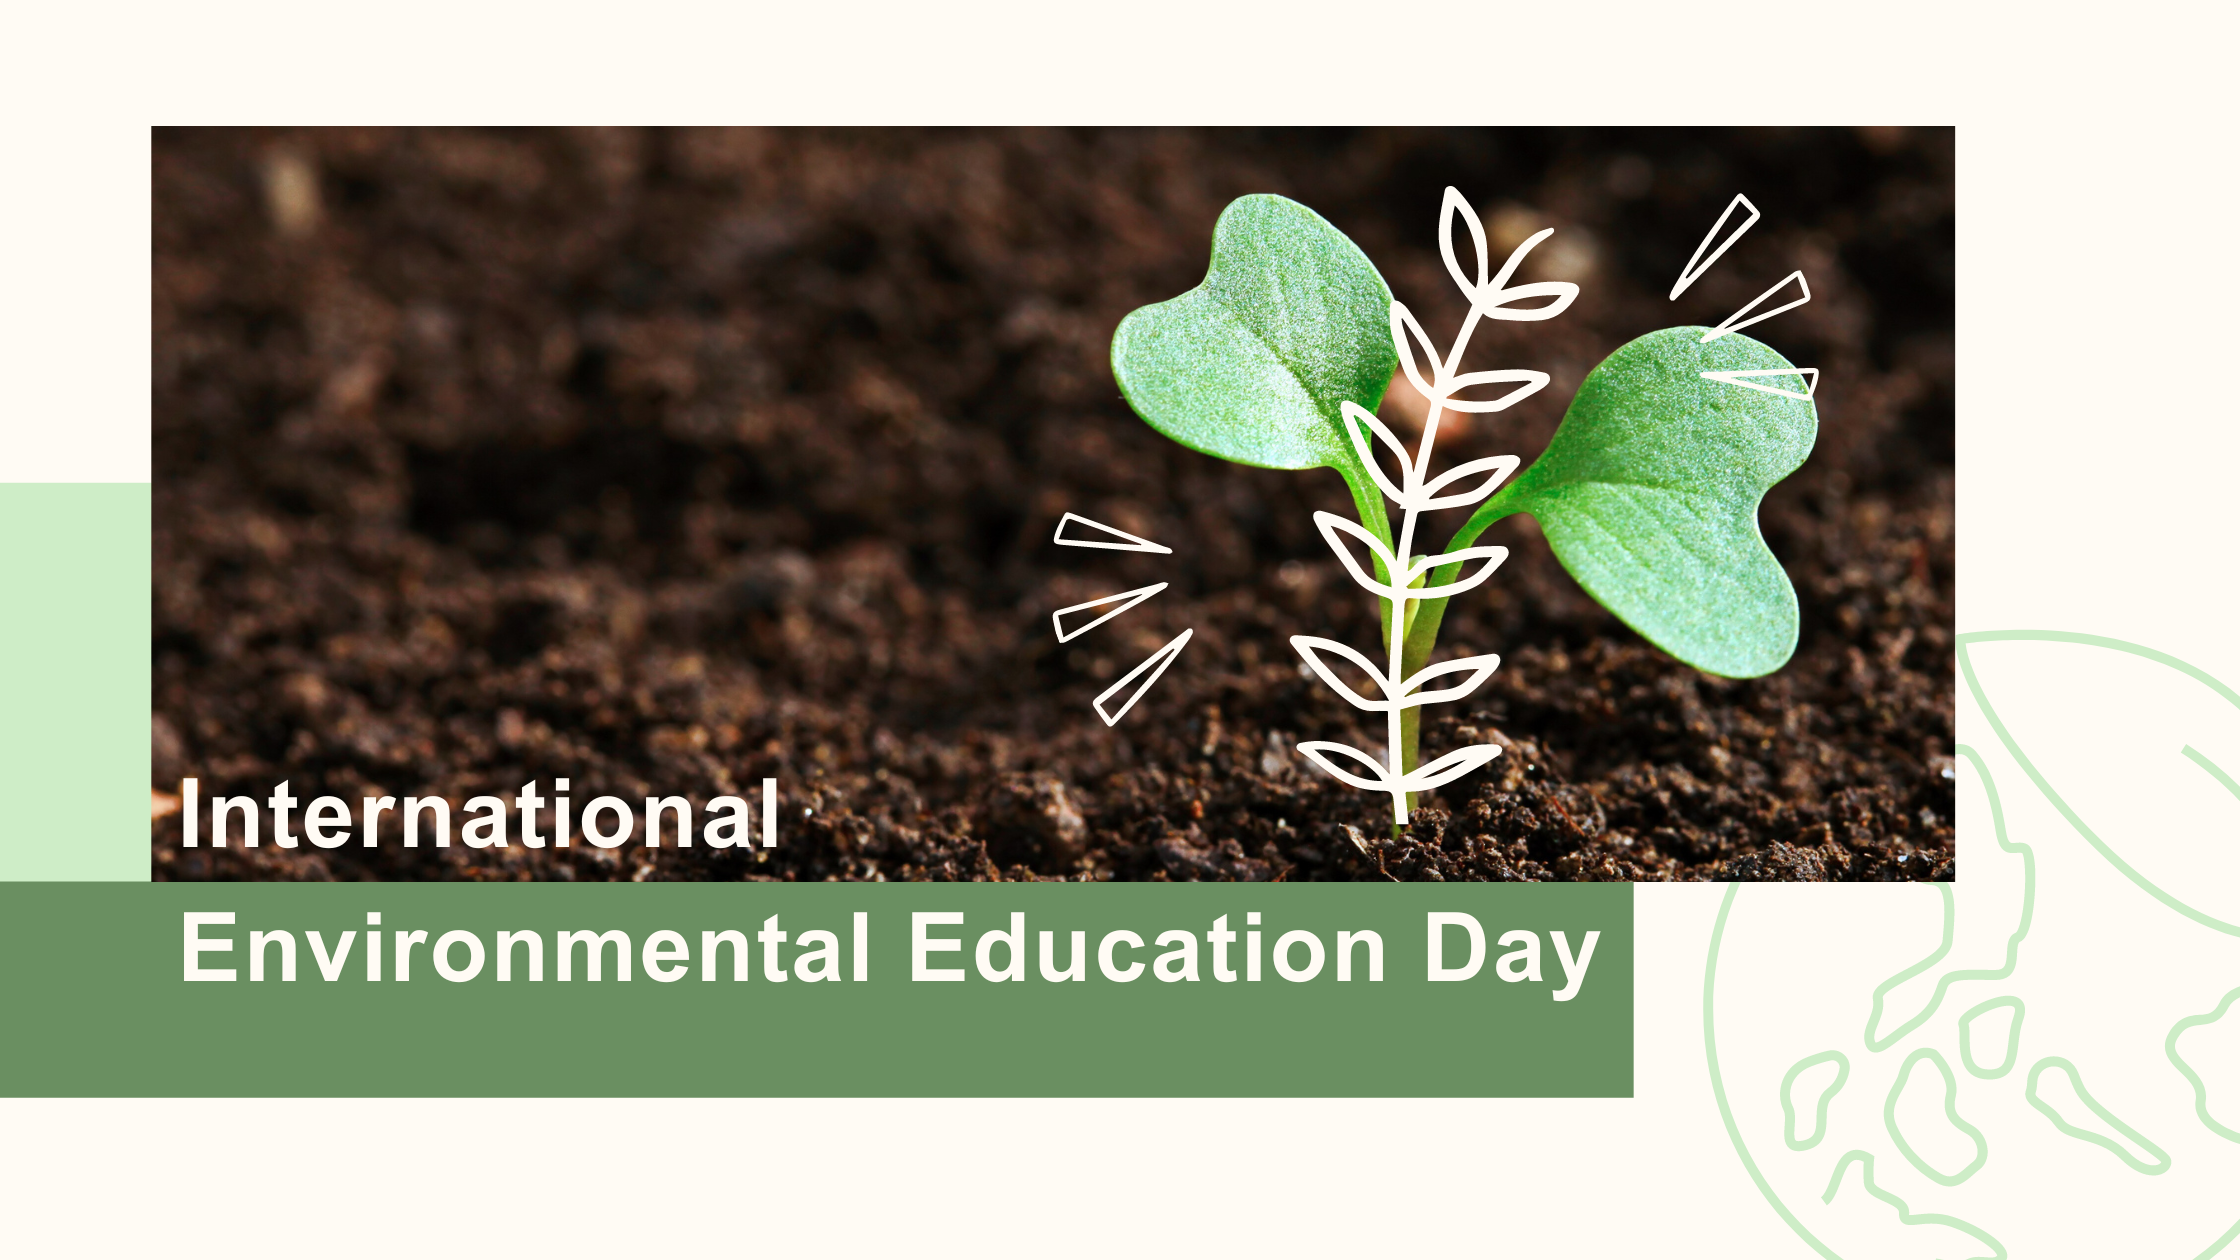 International Environmental Education Day – A Day for Change